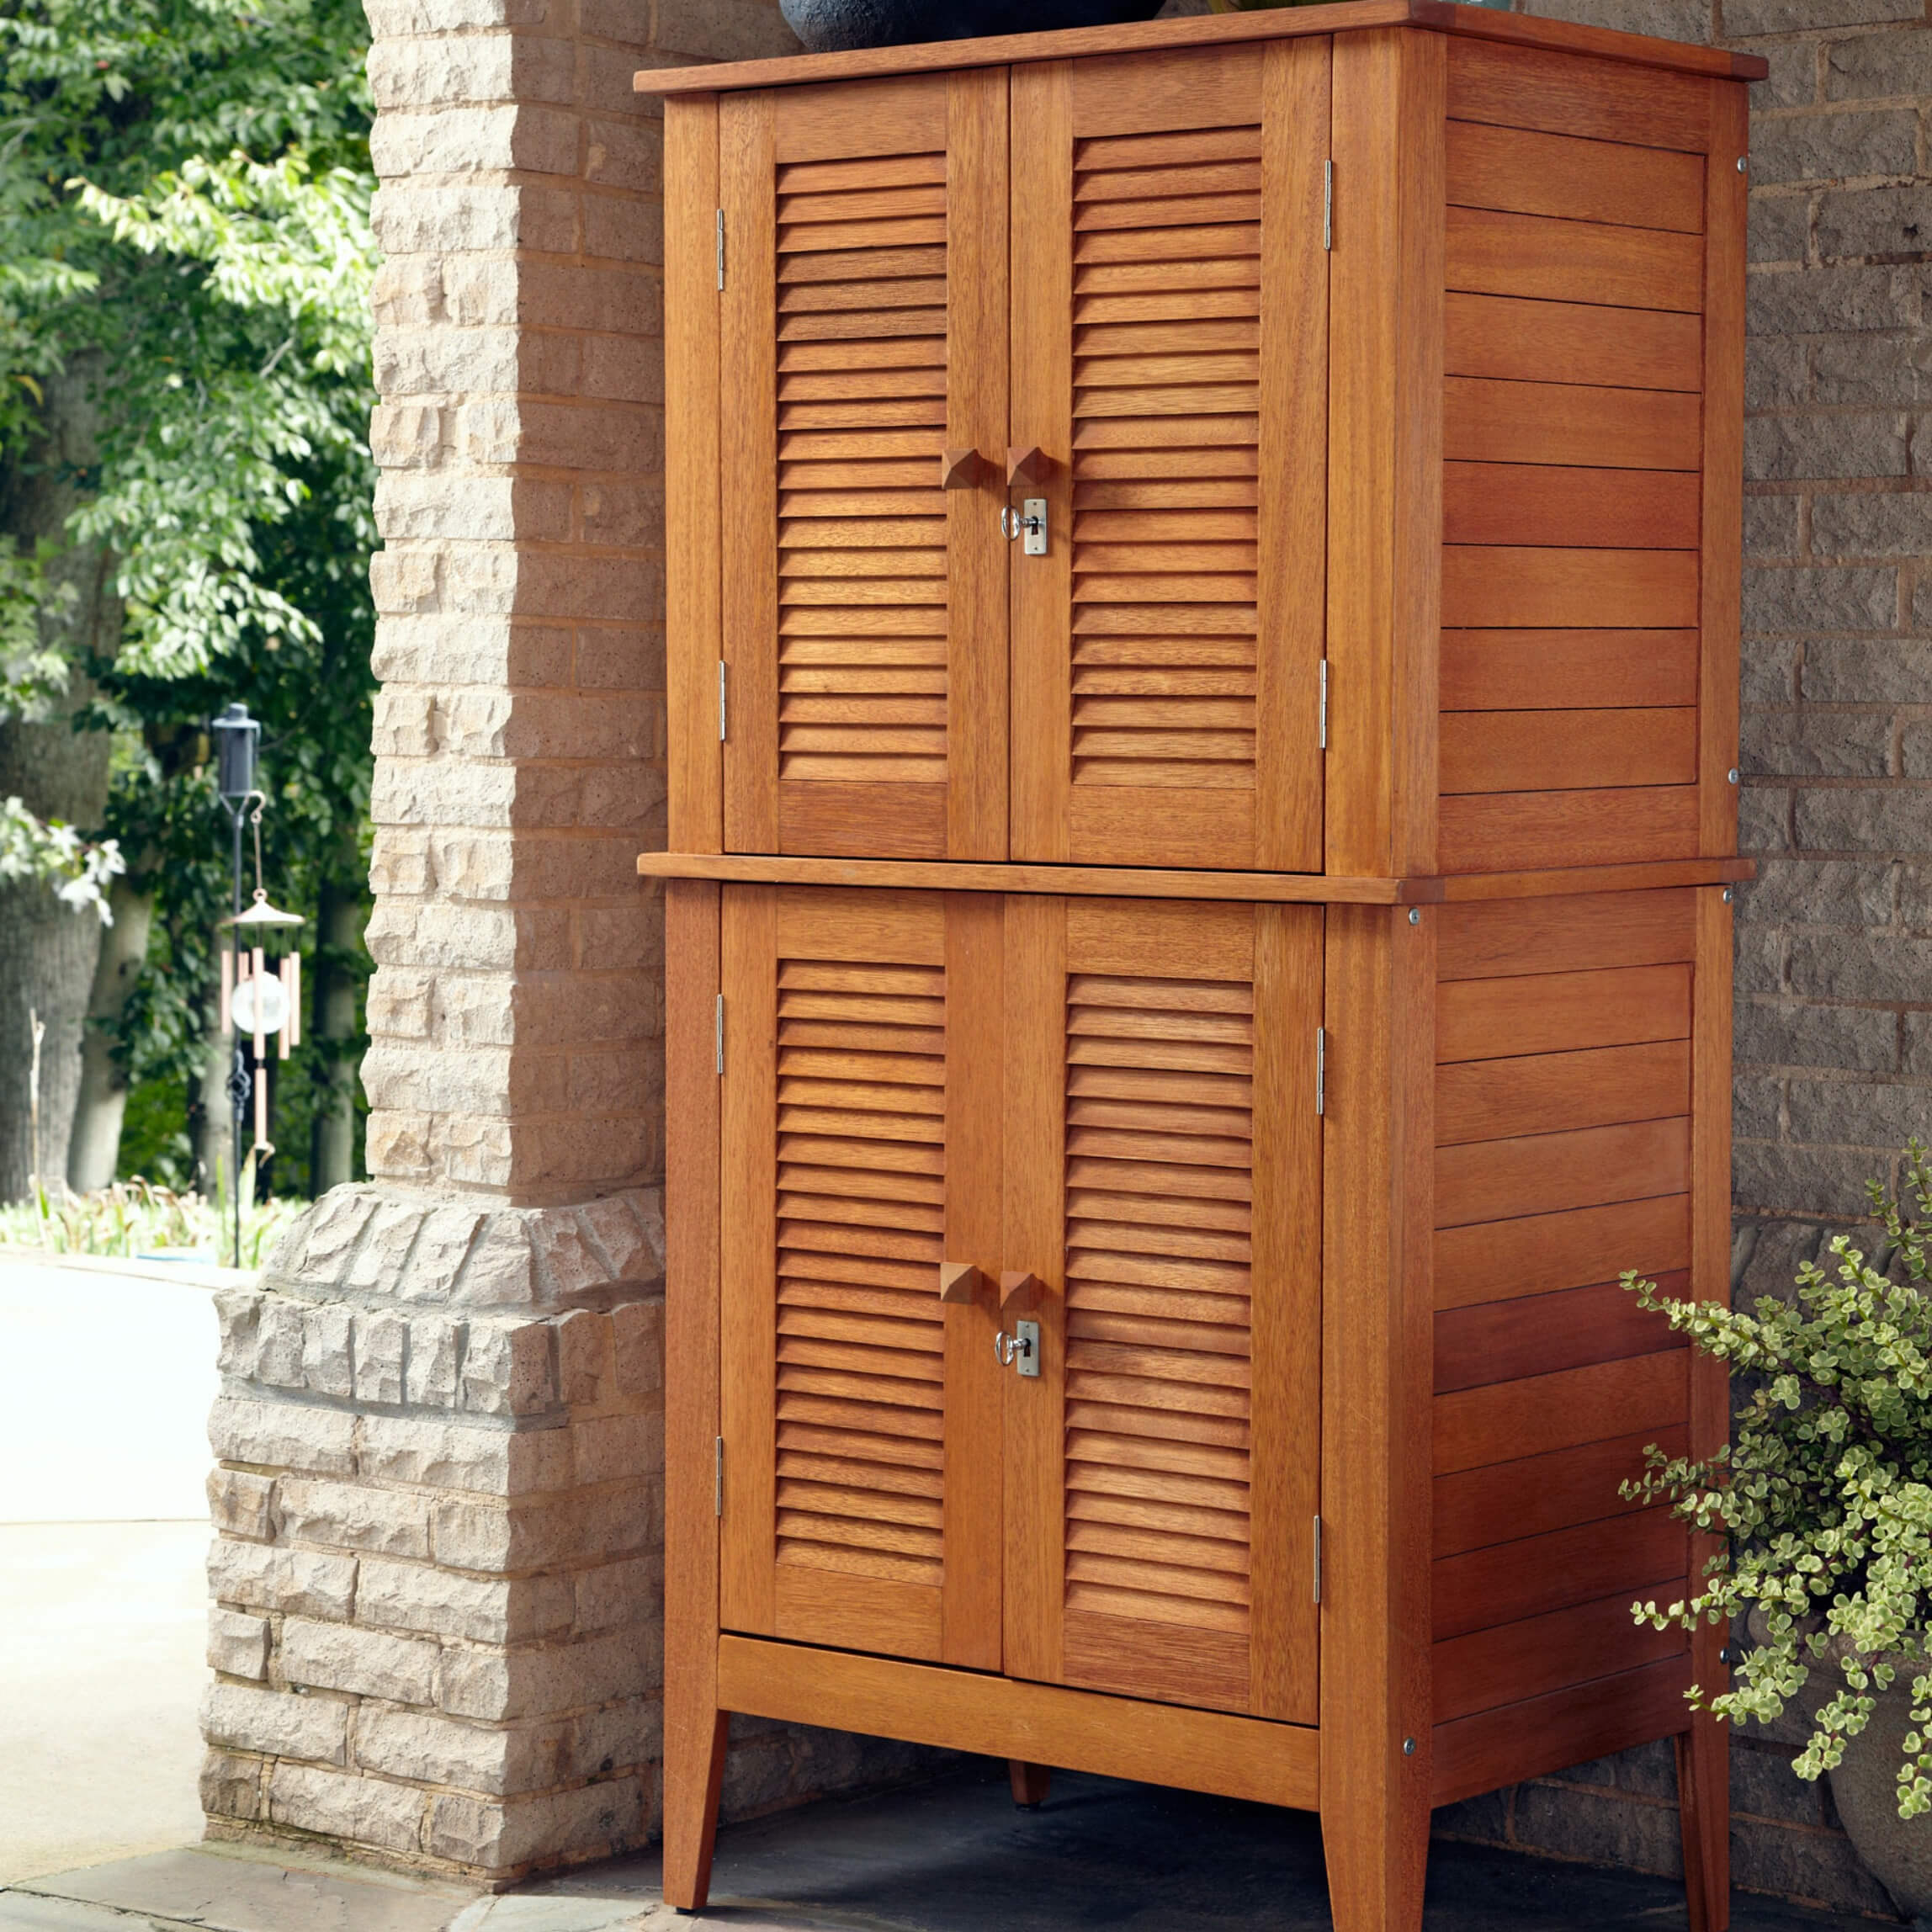 Top 10 Types Of Outdoor Deck Storage Boxes for measurements 2296 X 2296